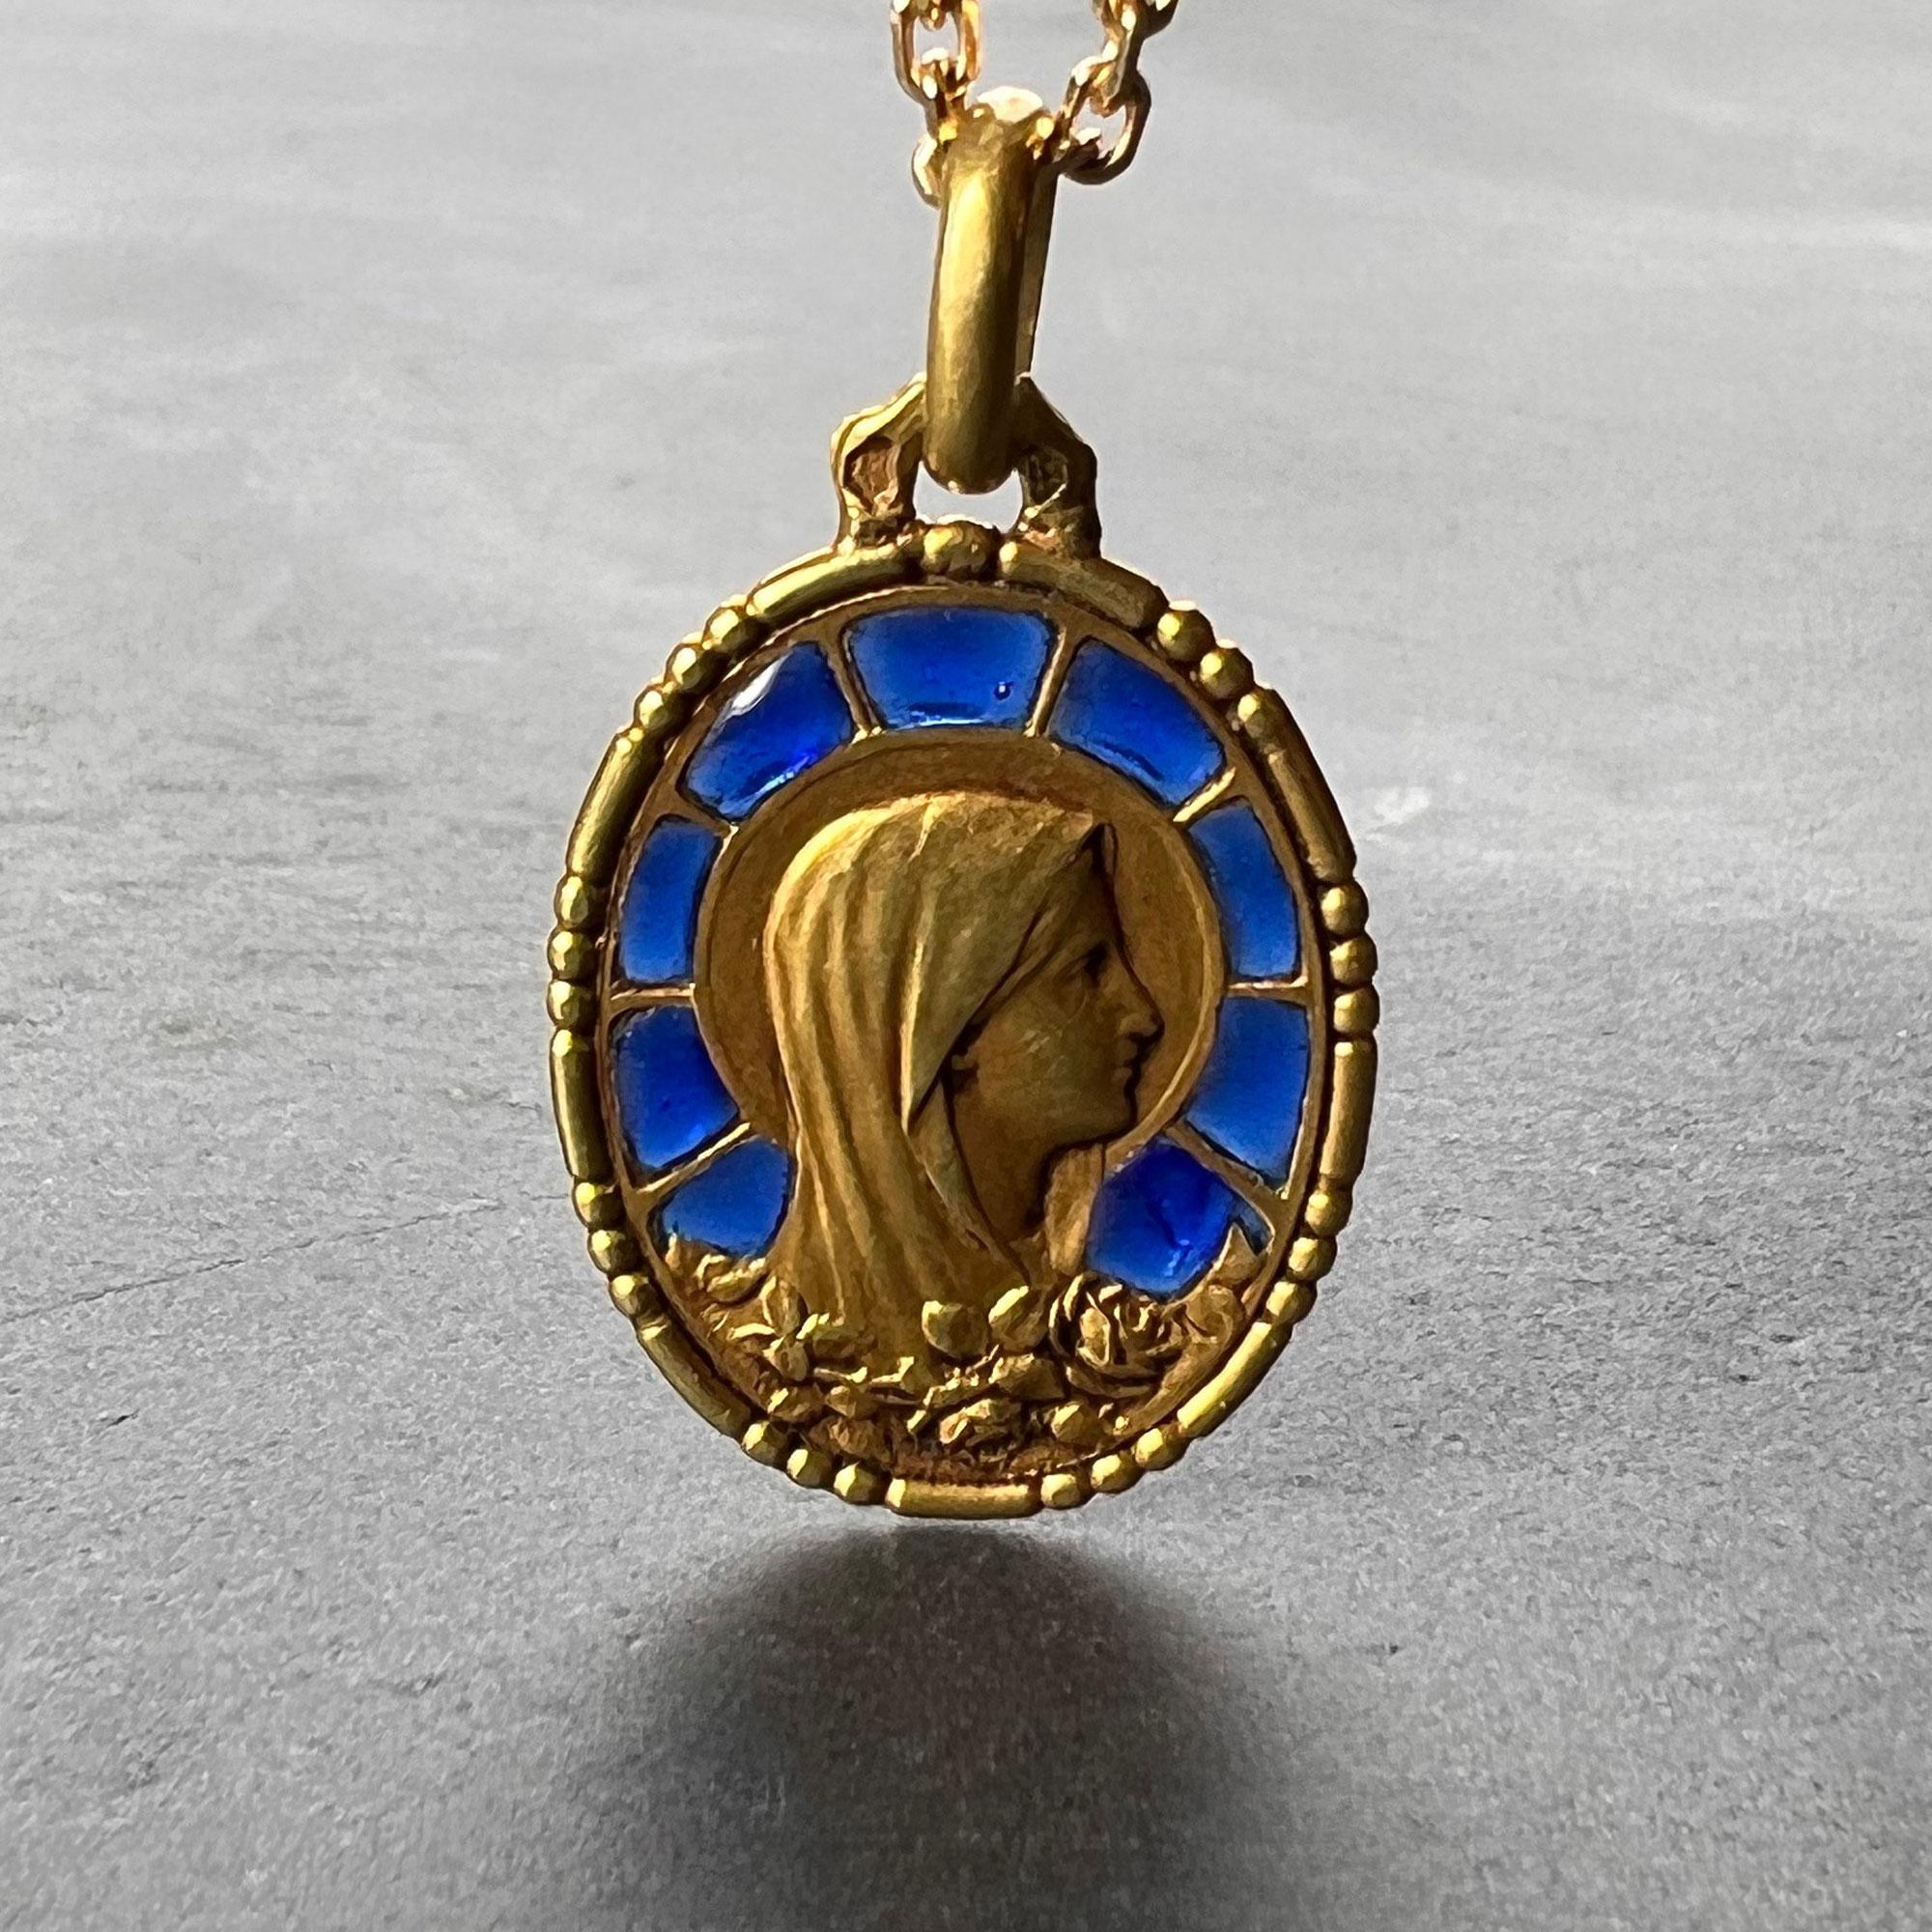 An 18 karat (18K) yellow gold charm pendant set with plique a jour blue enamel designed as the Virgin Mary with a motif of roses. Engraved with a monogram for SJ and the date 31-12-1935. Stamped with the eagle mark for 18 karat gold and French